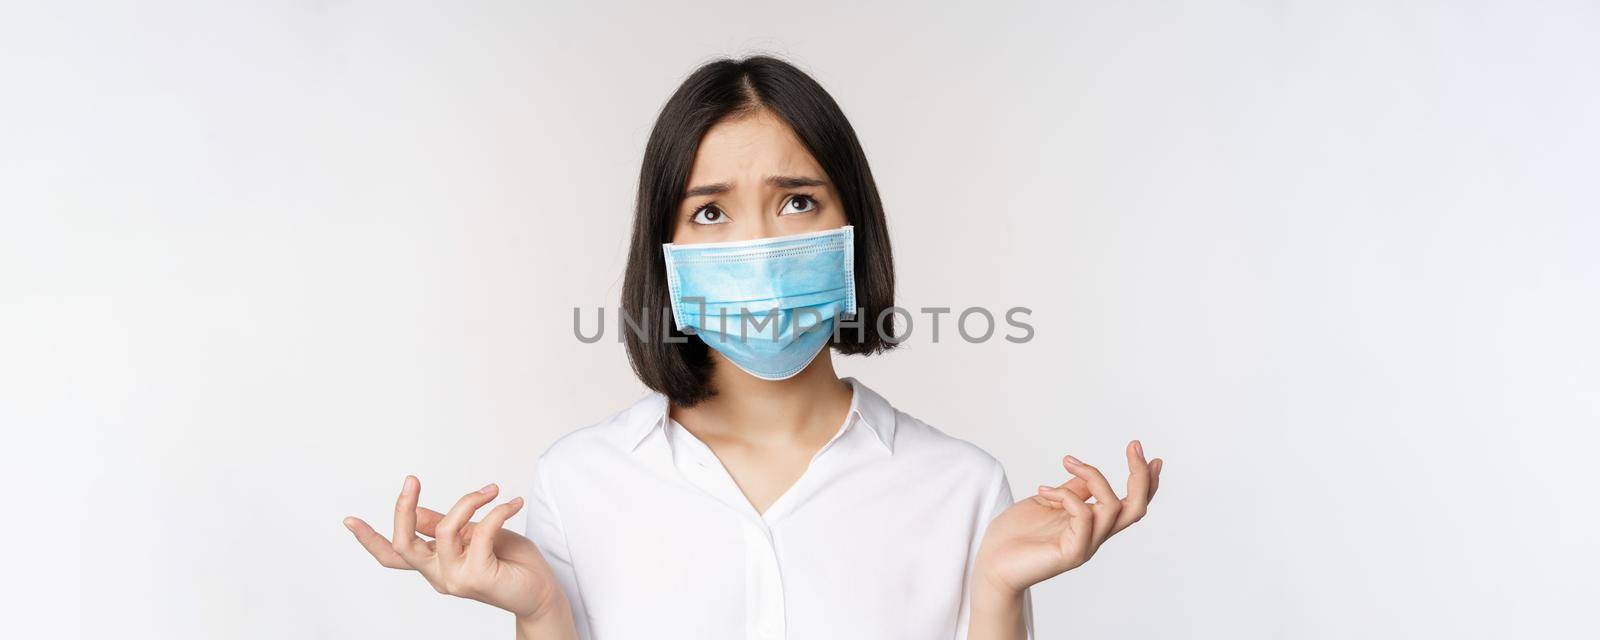 Distressed and miserable young asian woman in face mask, looking up, looking up sad, standing over white background.